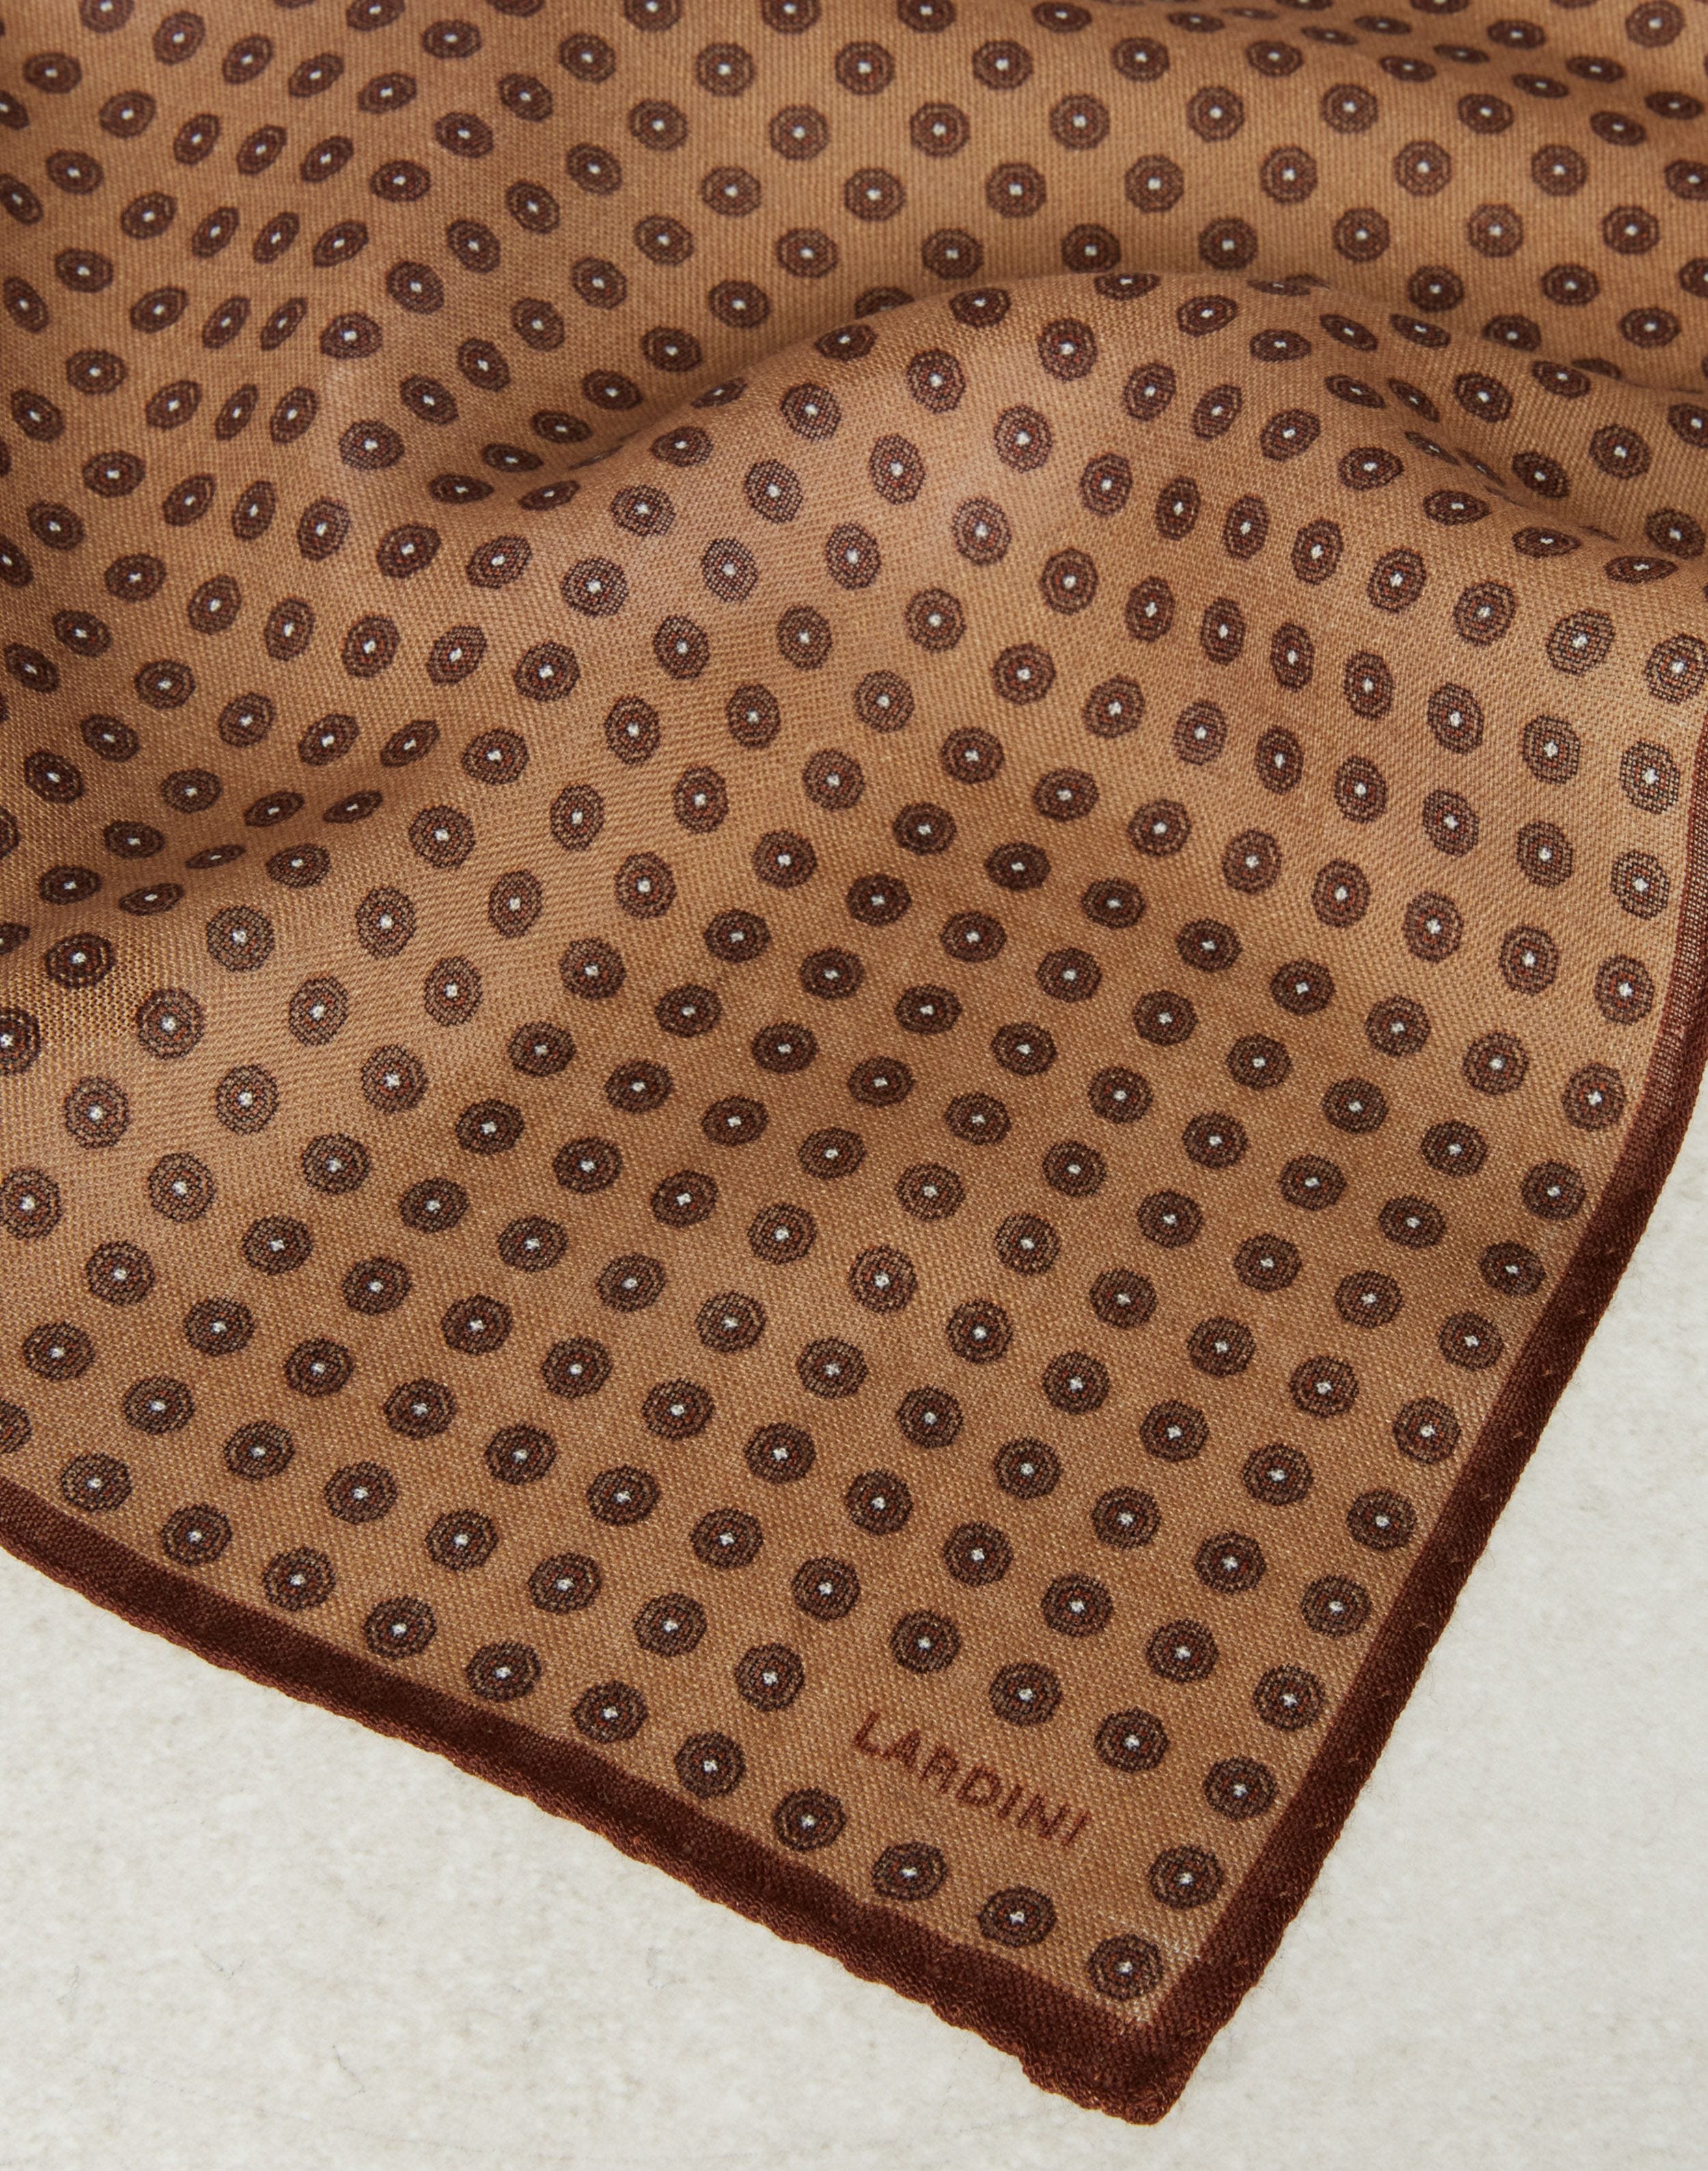 Beige and brown pocket square with geometric print